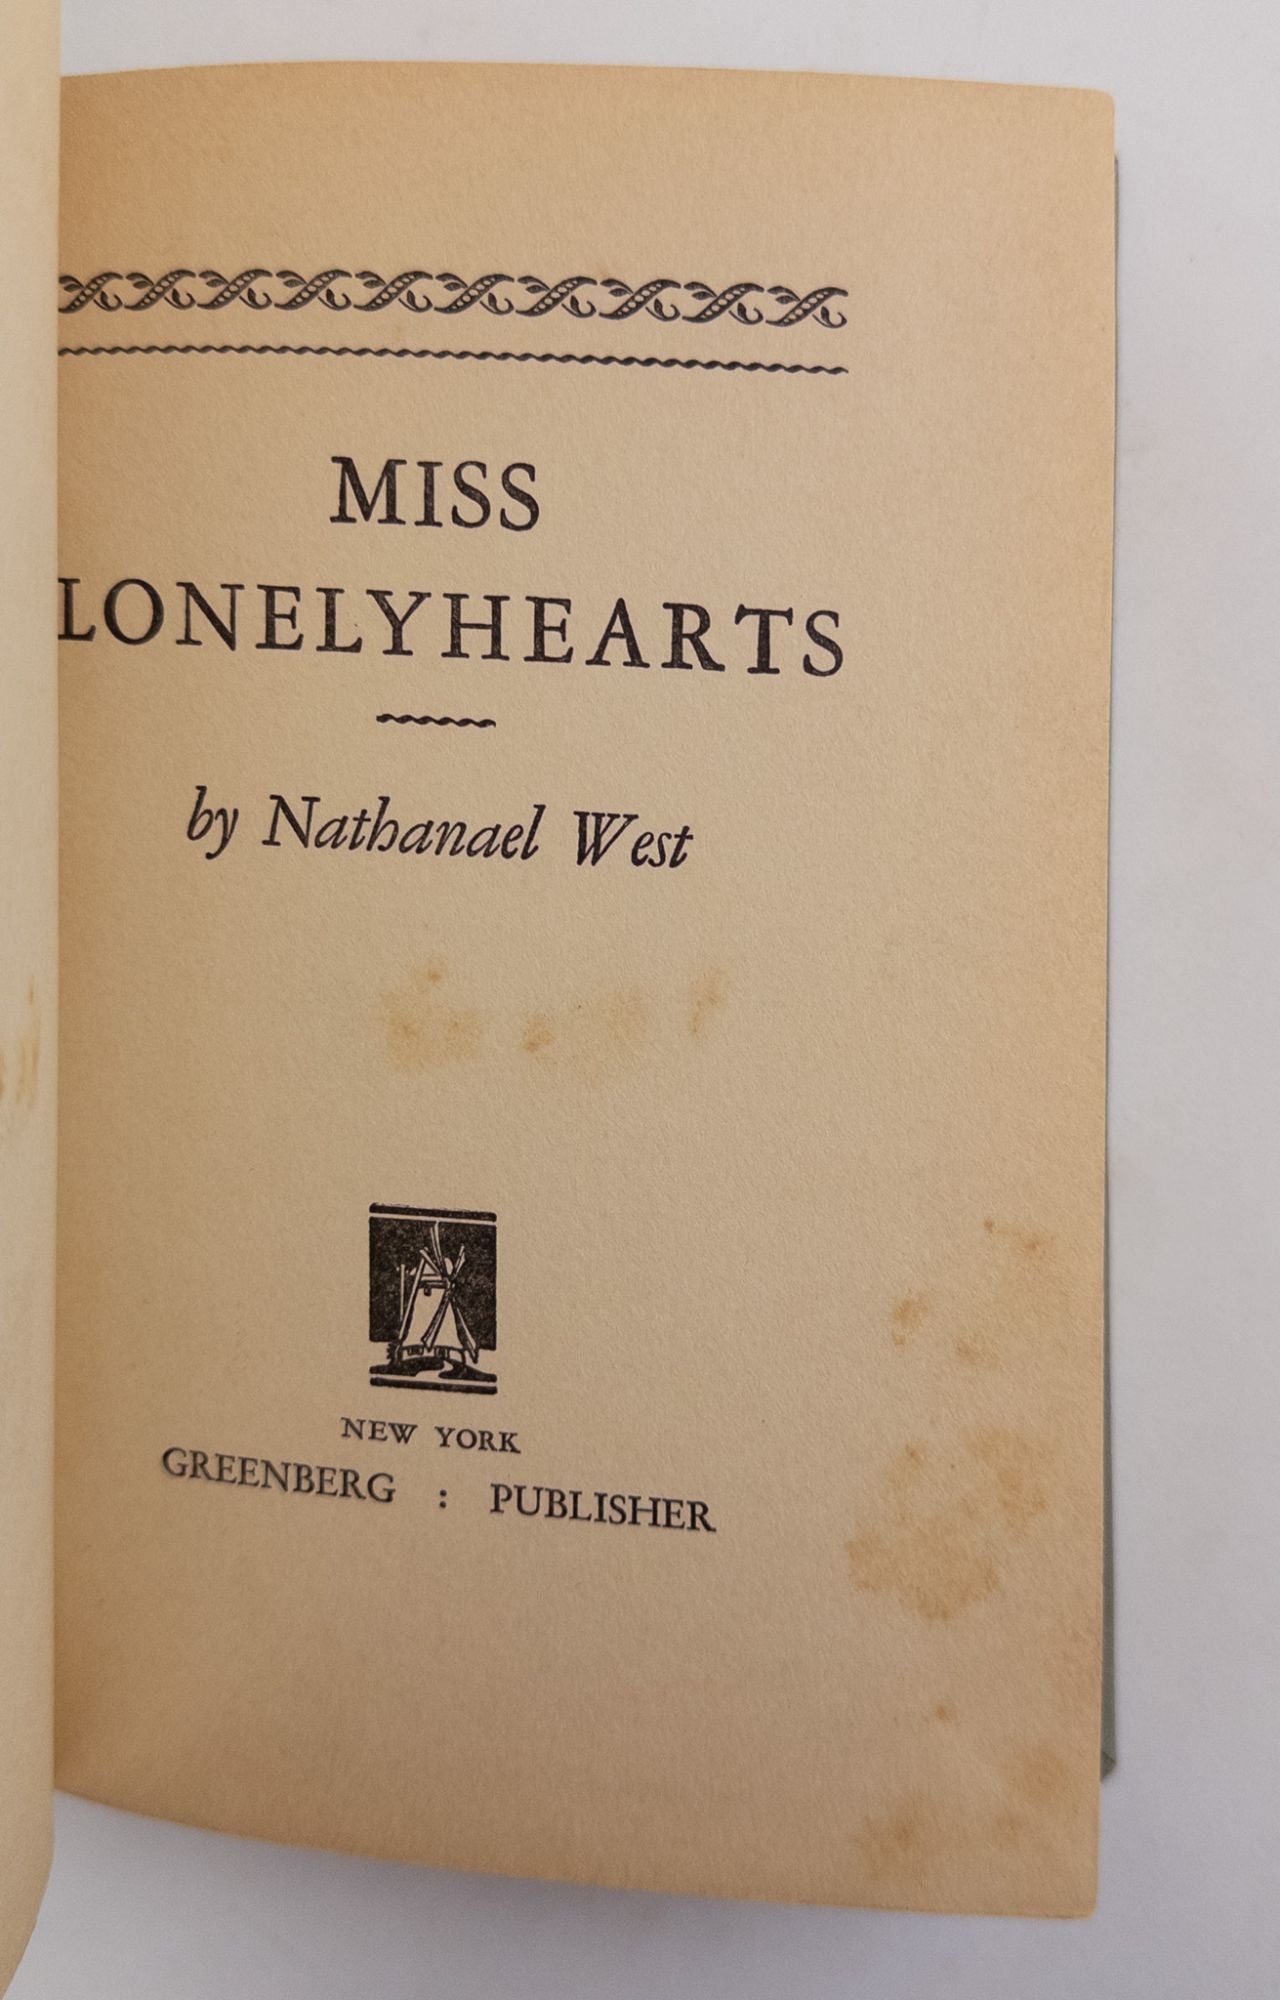 Product Image for MISS LONELYHEARTS